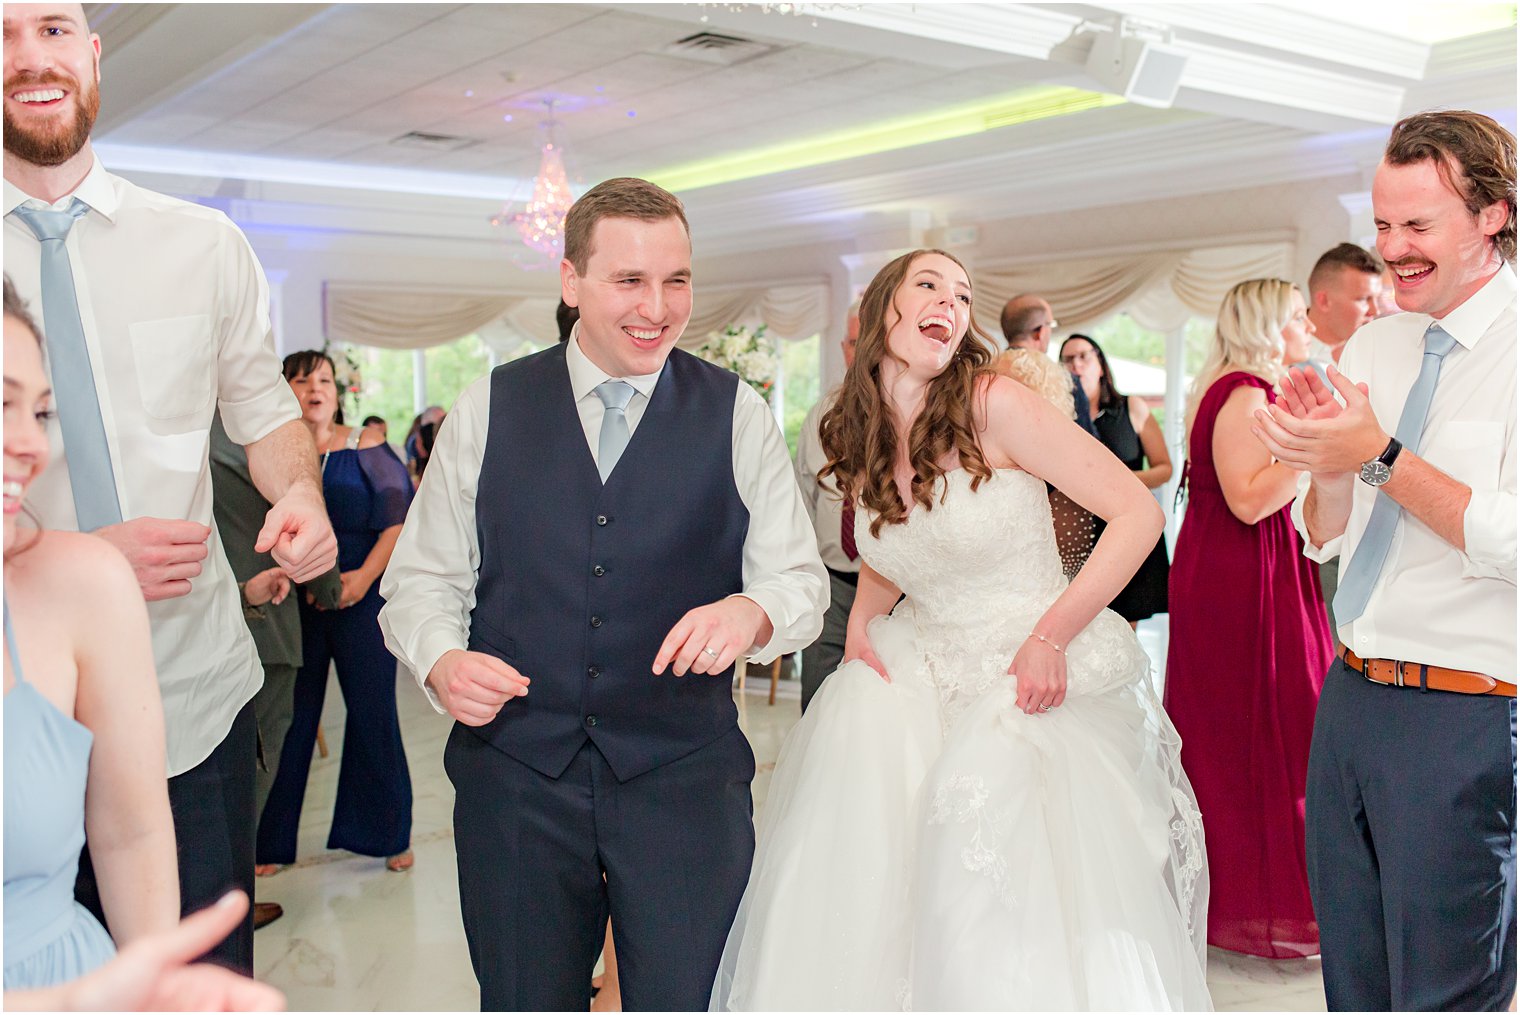 newlyweds dance with guests during NJ wedding reception 